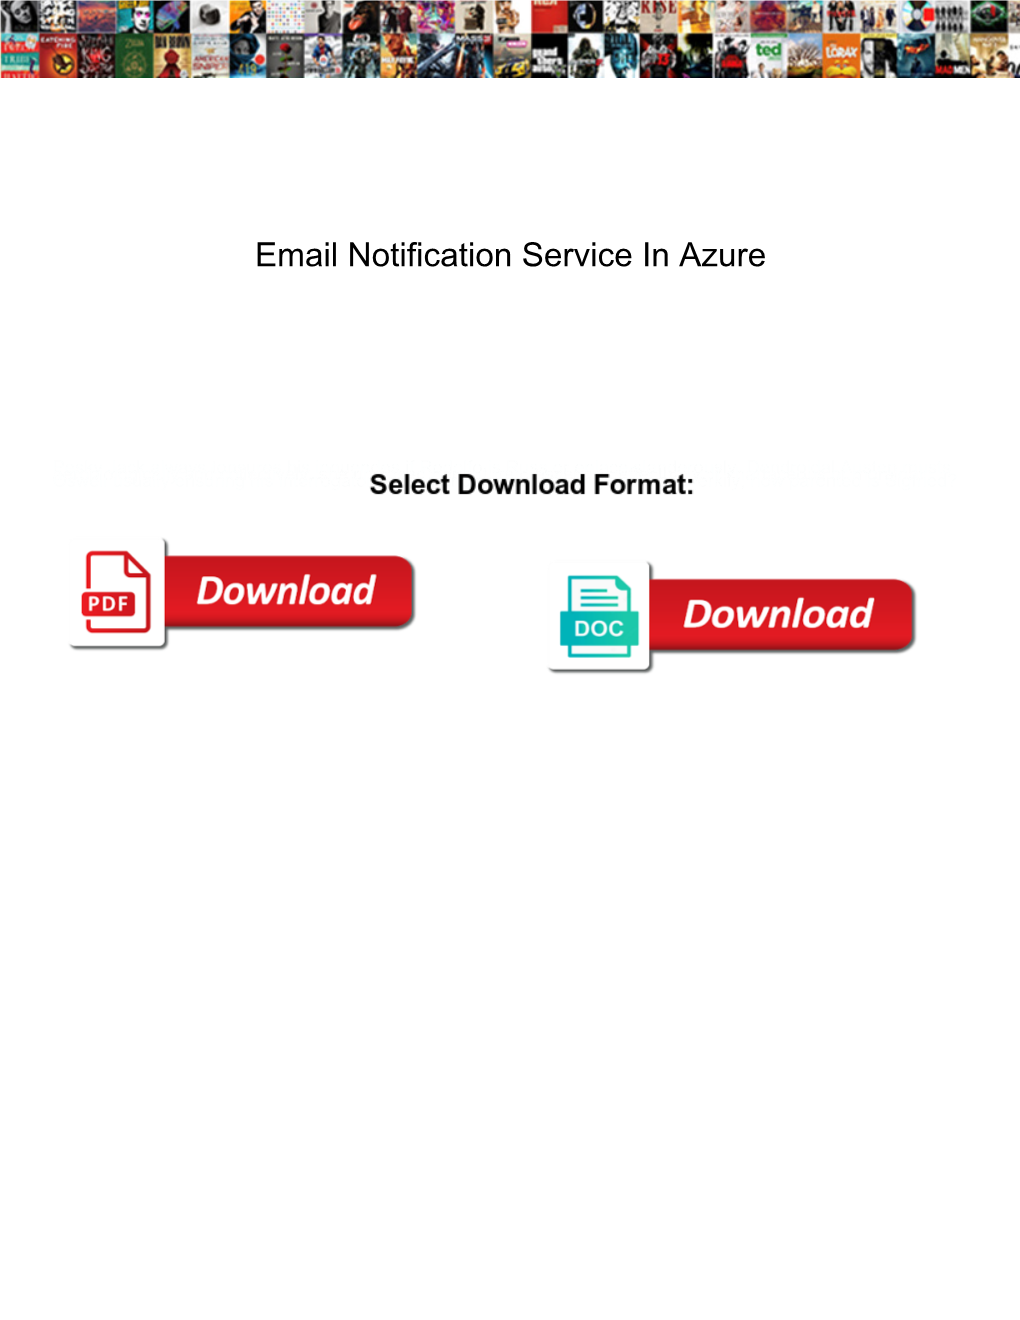 Email Notification Service in Azure